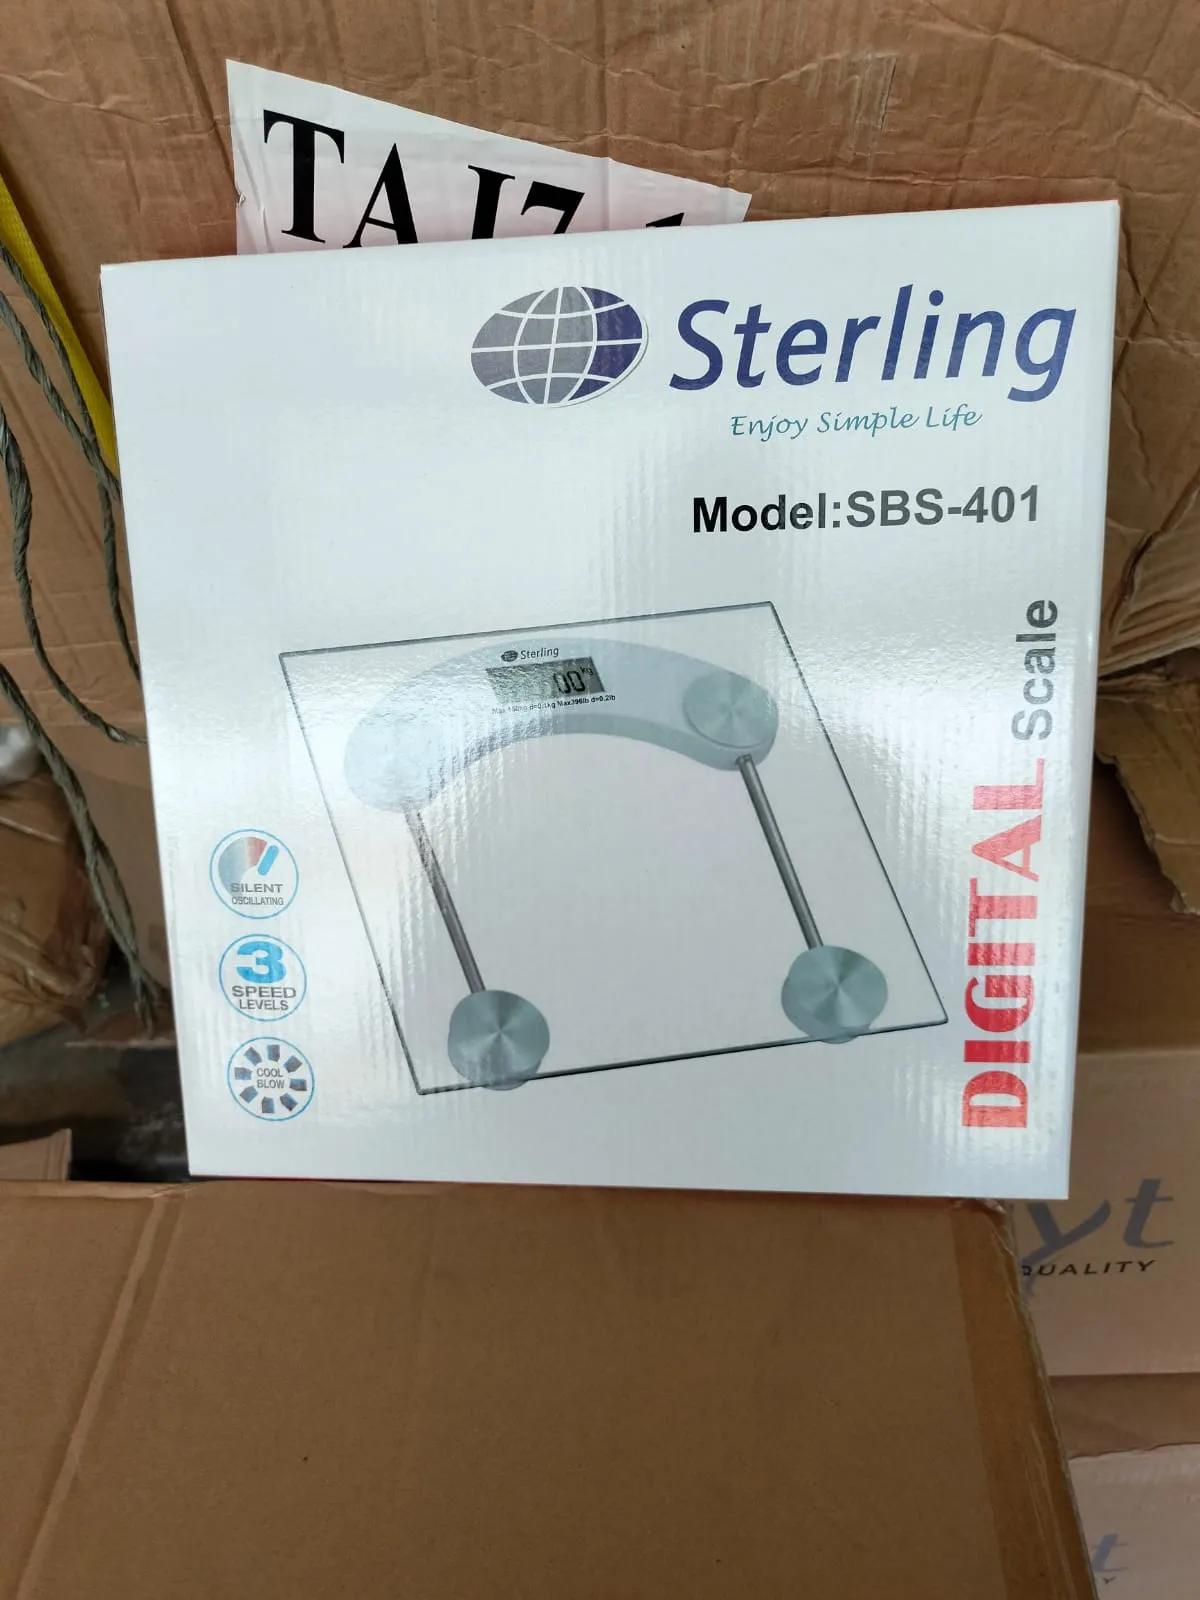 Sterling personal weighing scale, Digital  Personal  Weight Measuring  Bathroom Scale.